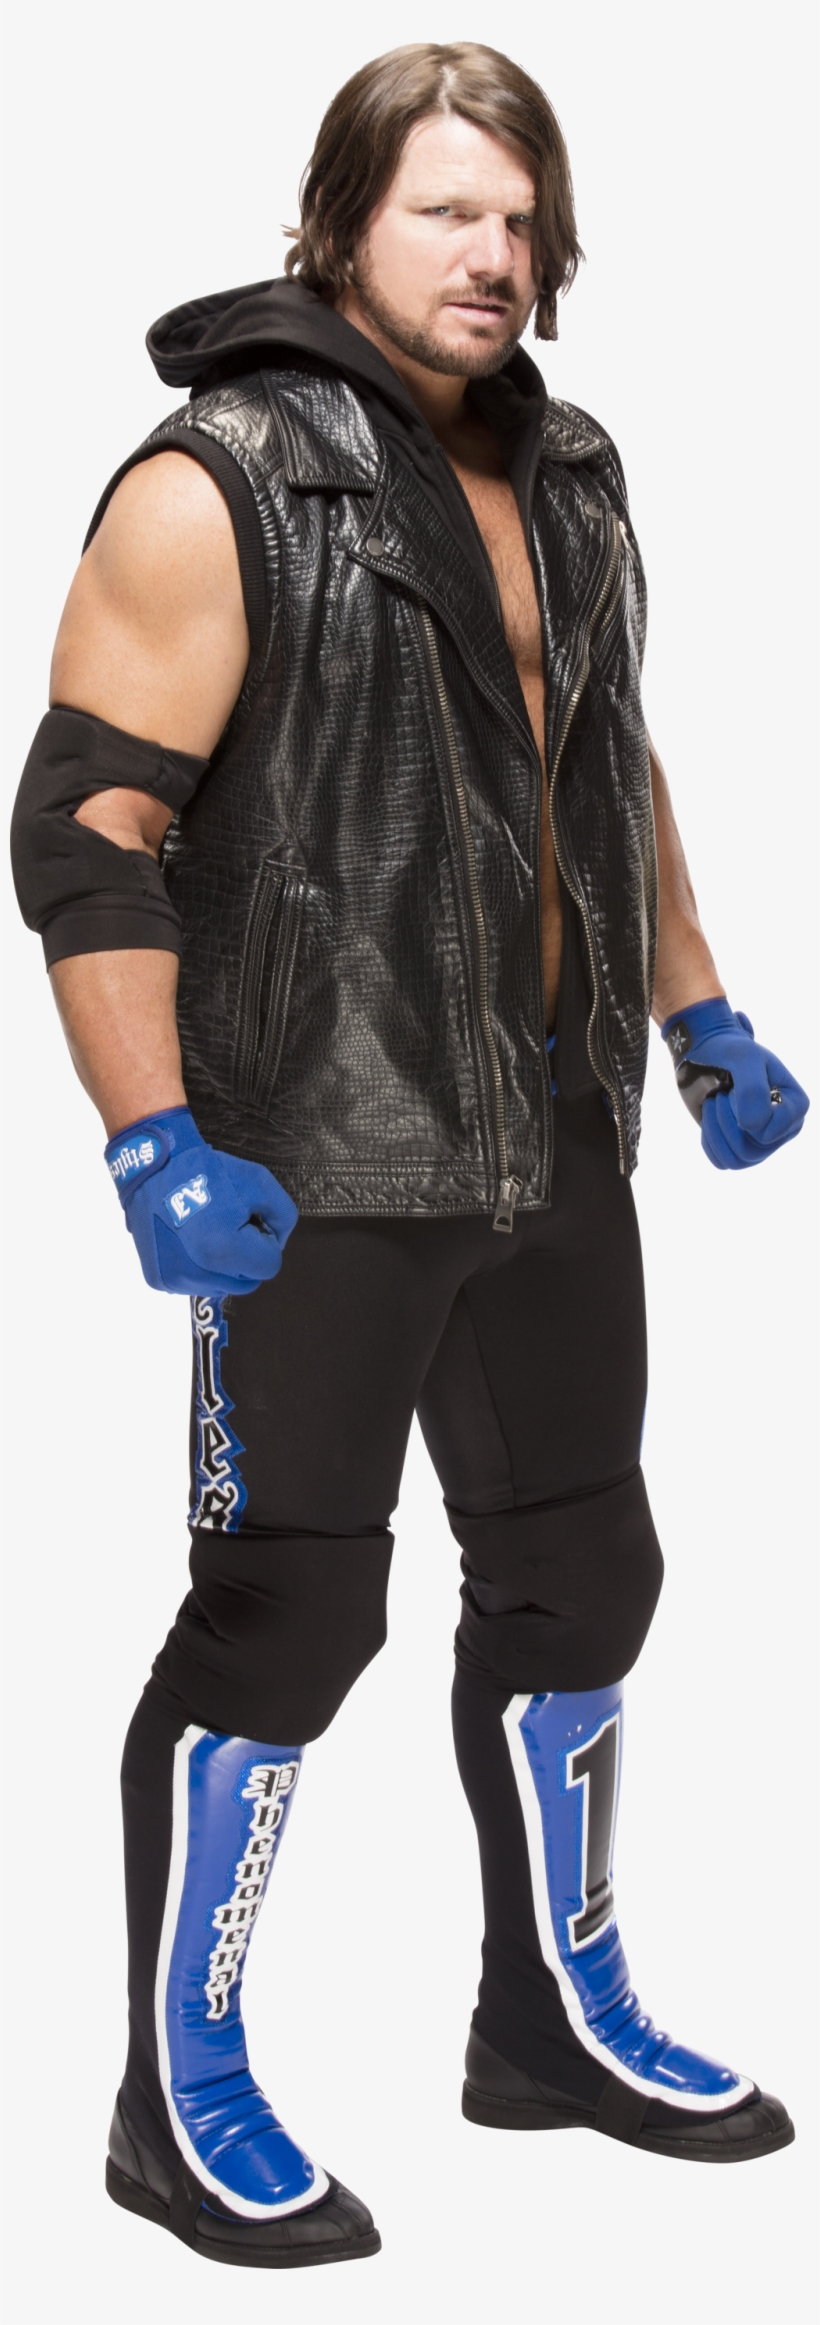 Wwe Champion - Wwe Smackdown, transparent png #155558